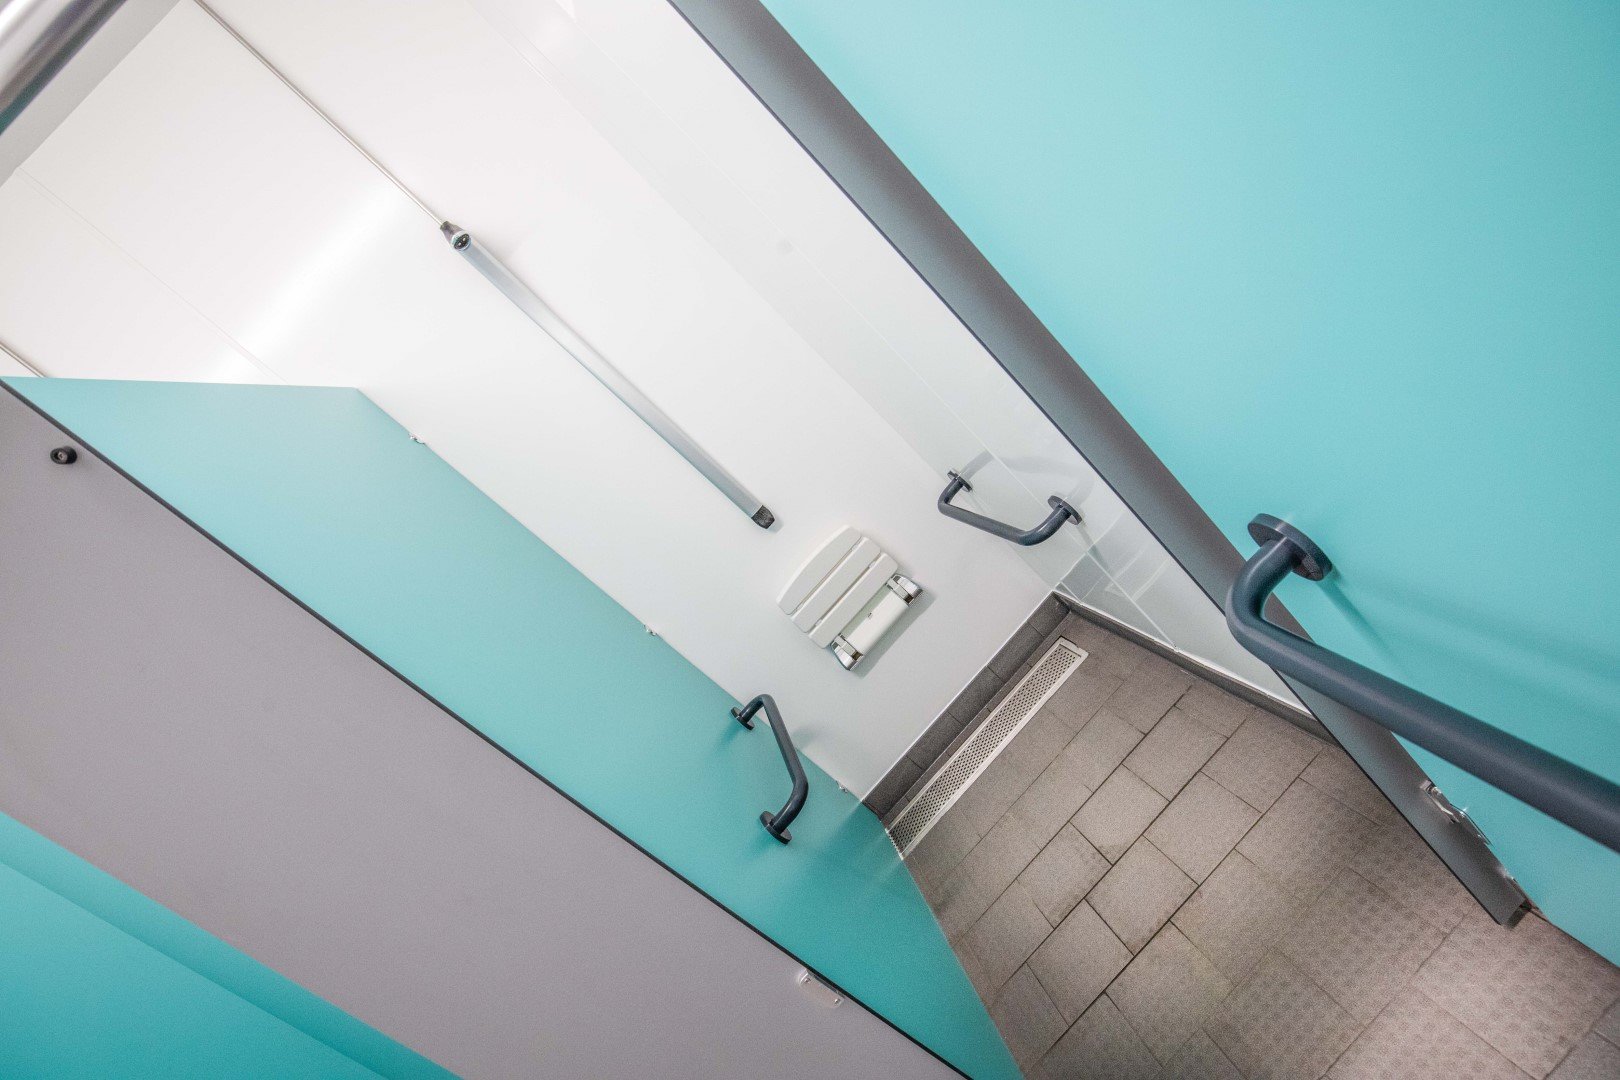 blue and grey shower cubicle with hygienic wall cladding at riverside campsite.jpg